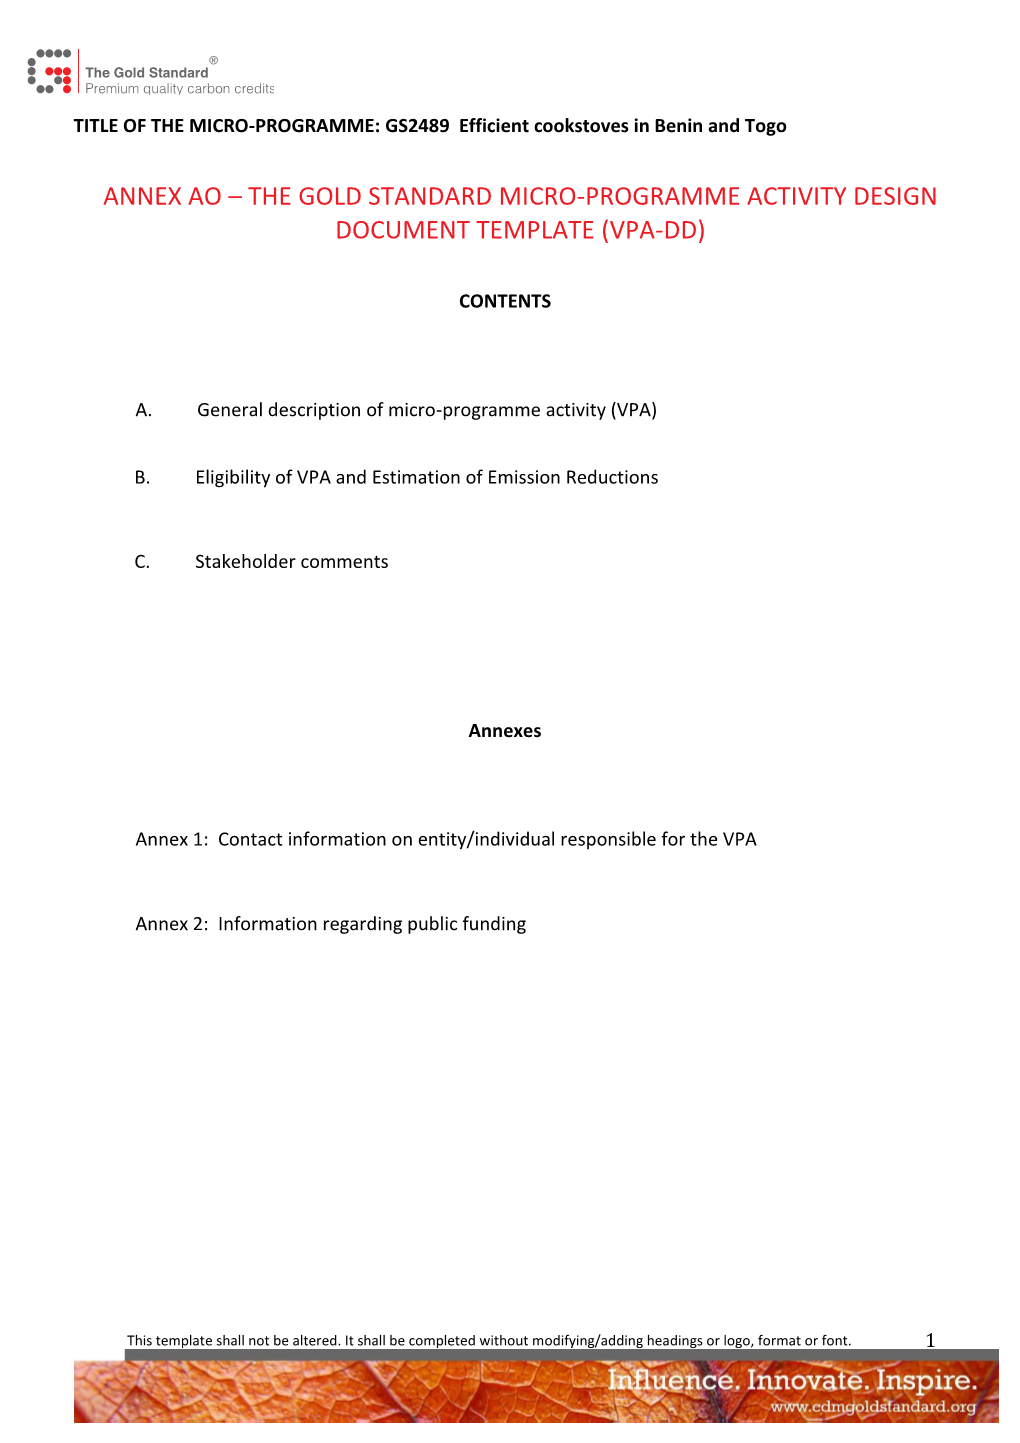 The Gold Standard Micro-Programme Activity Design Document Template (Vpa-Dd)